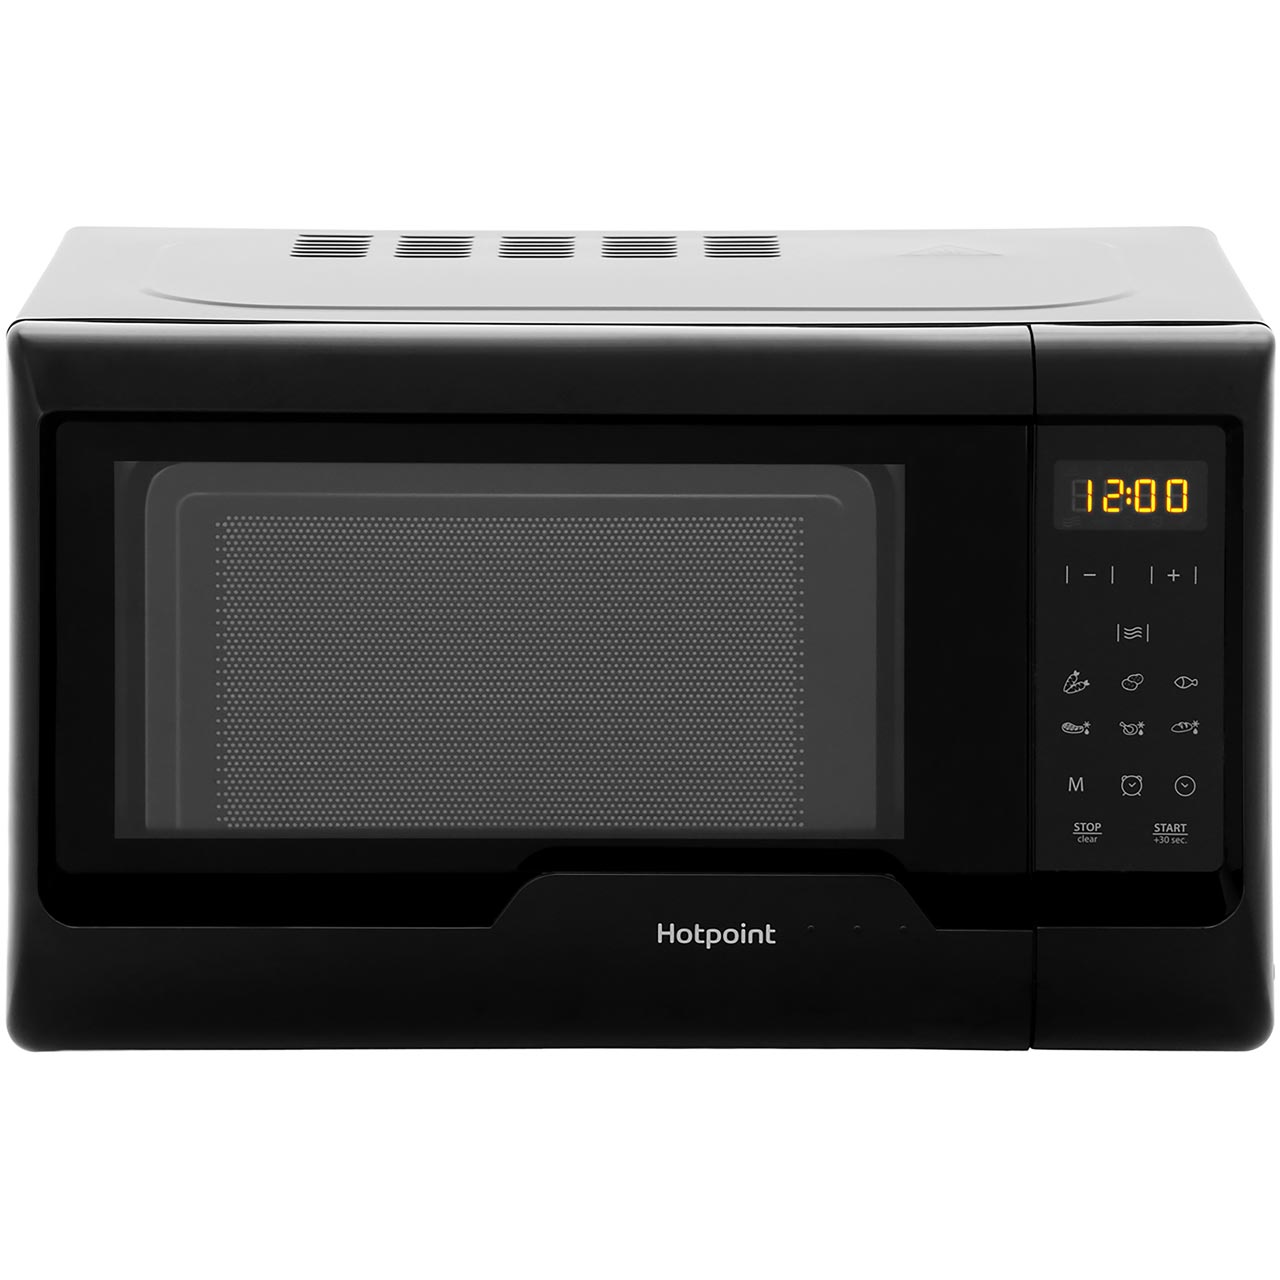 Hotpoint MWH2031MB0 20 Litre Microwave Review